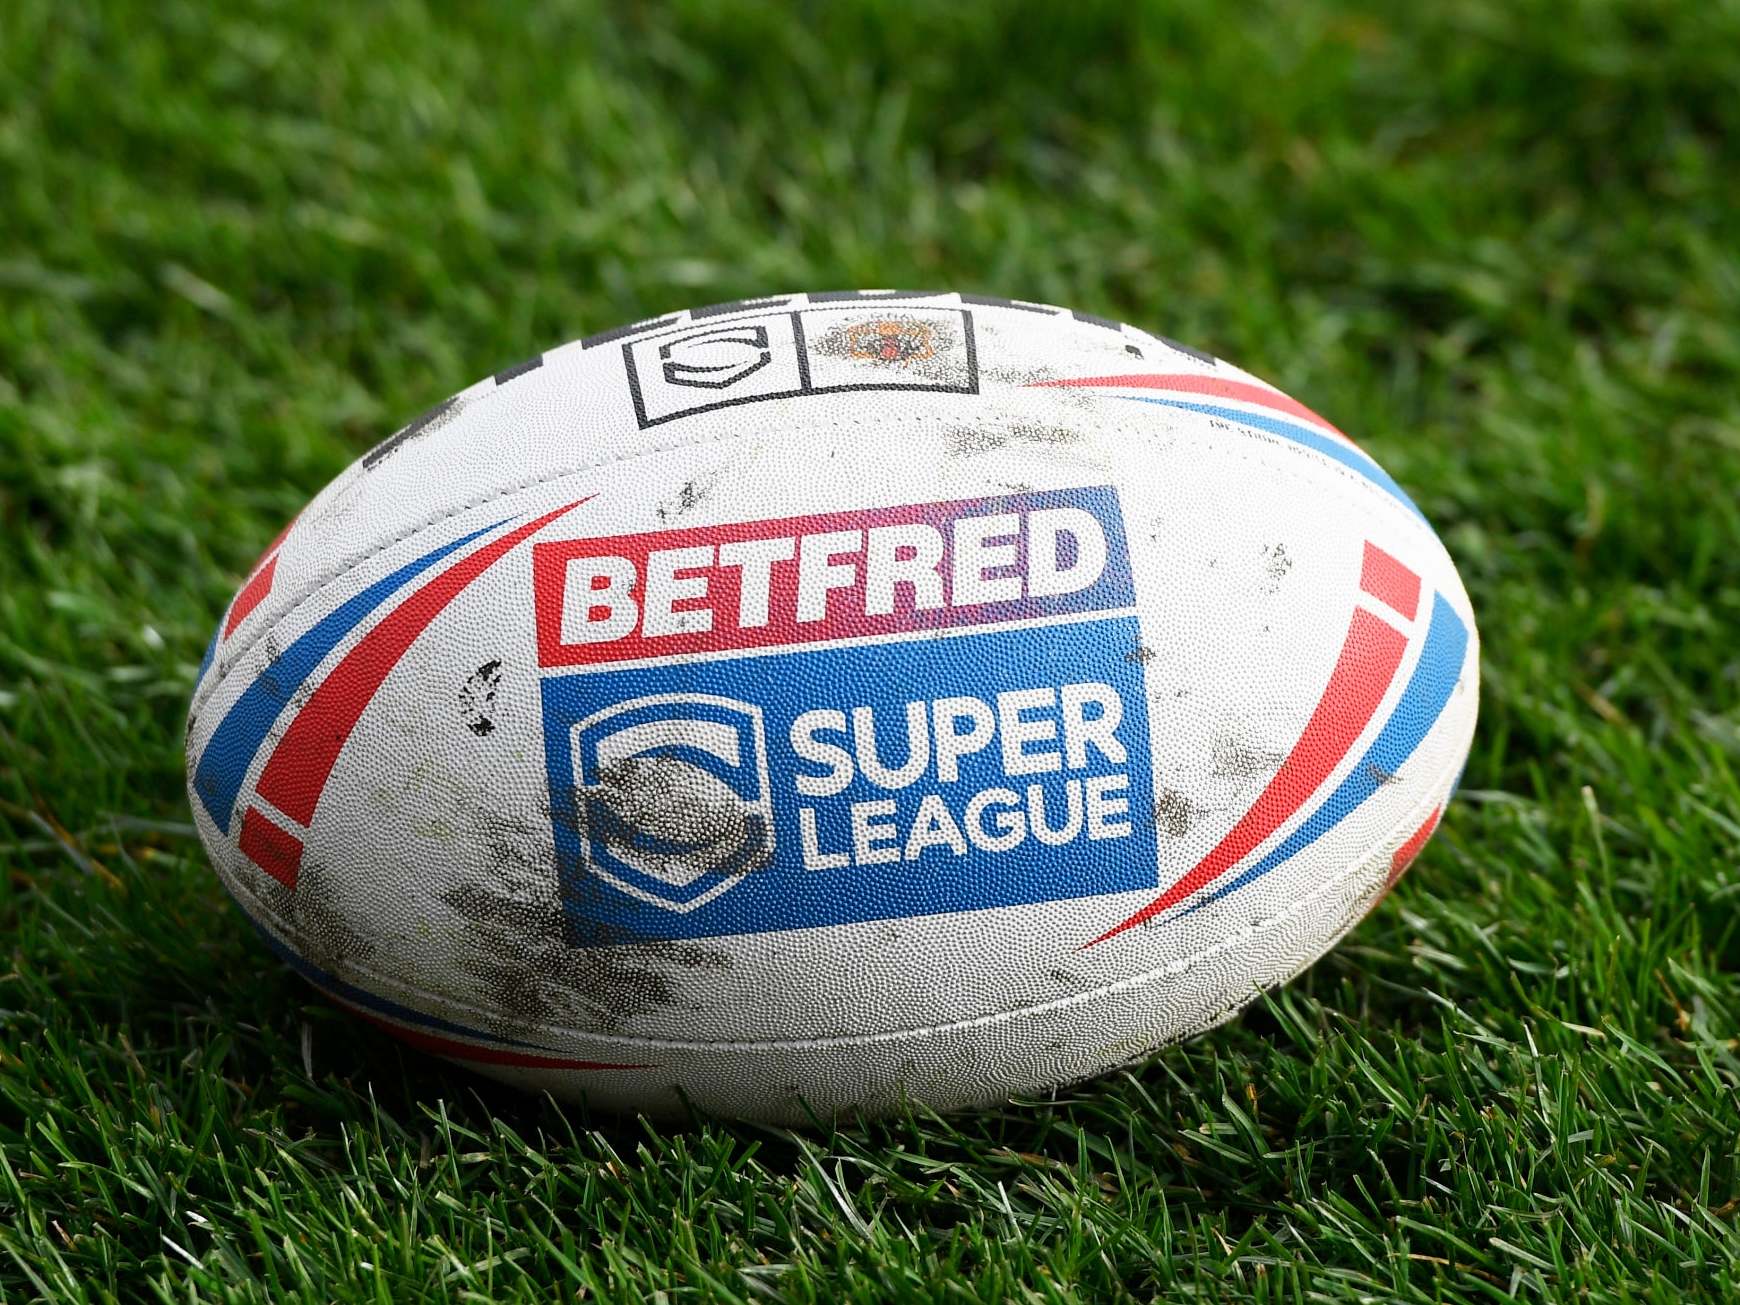 Rugby returns with Super League matches to resume at St Helens and Leeds stadiums in August